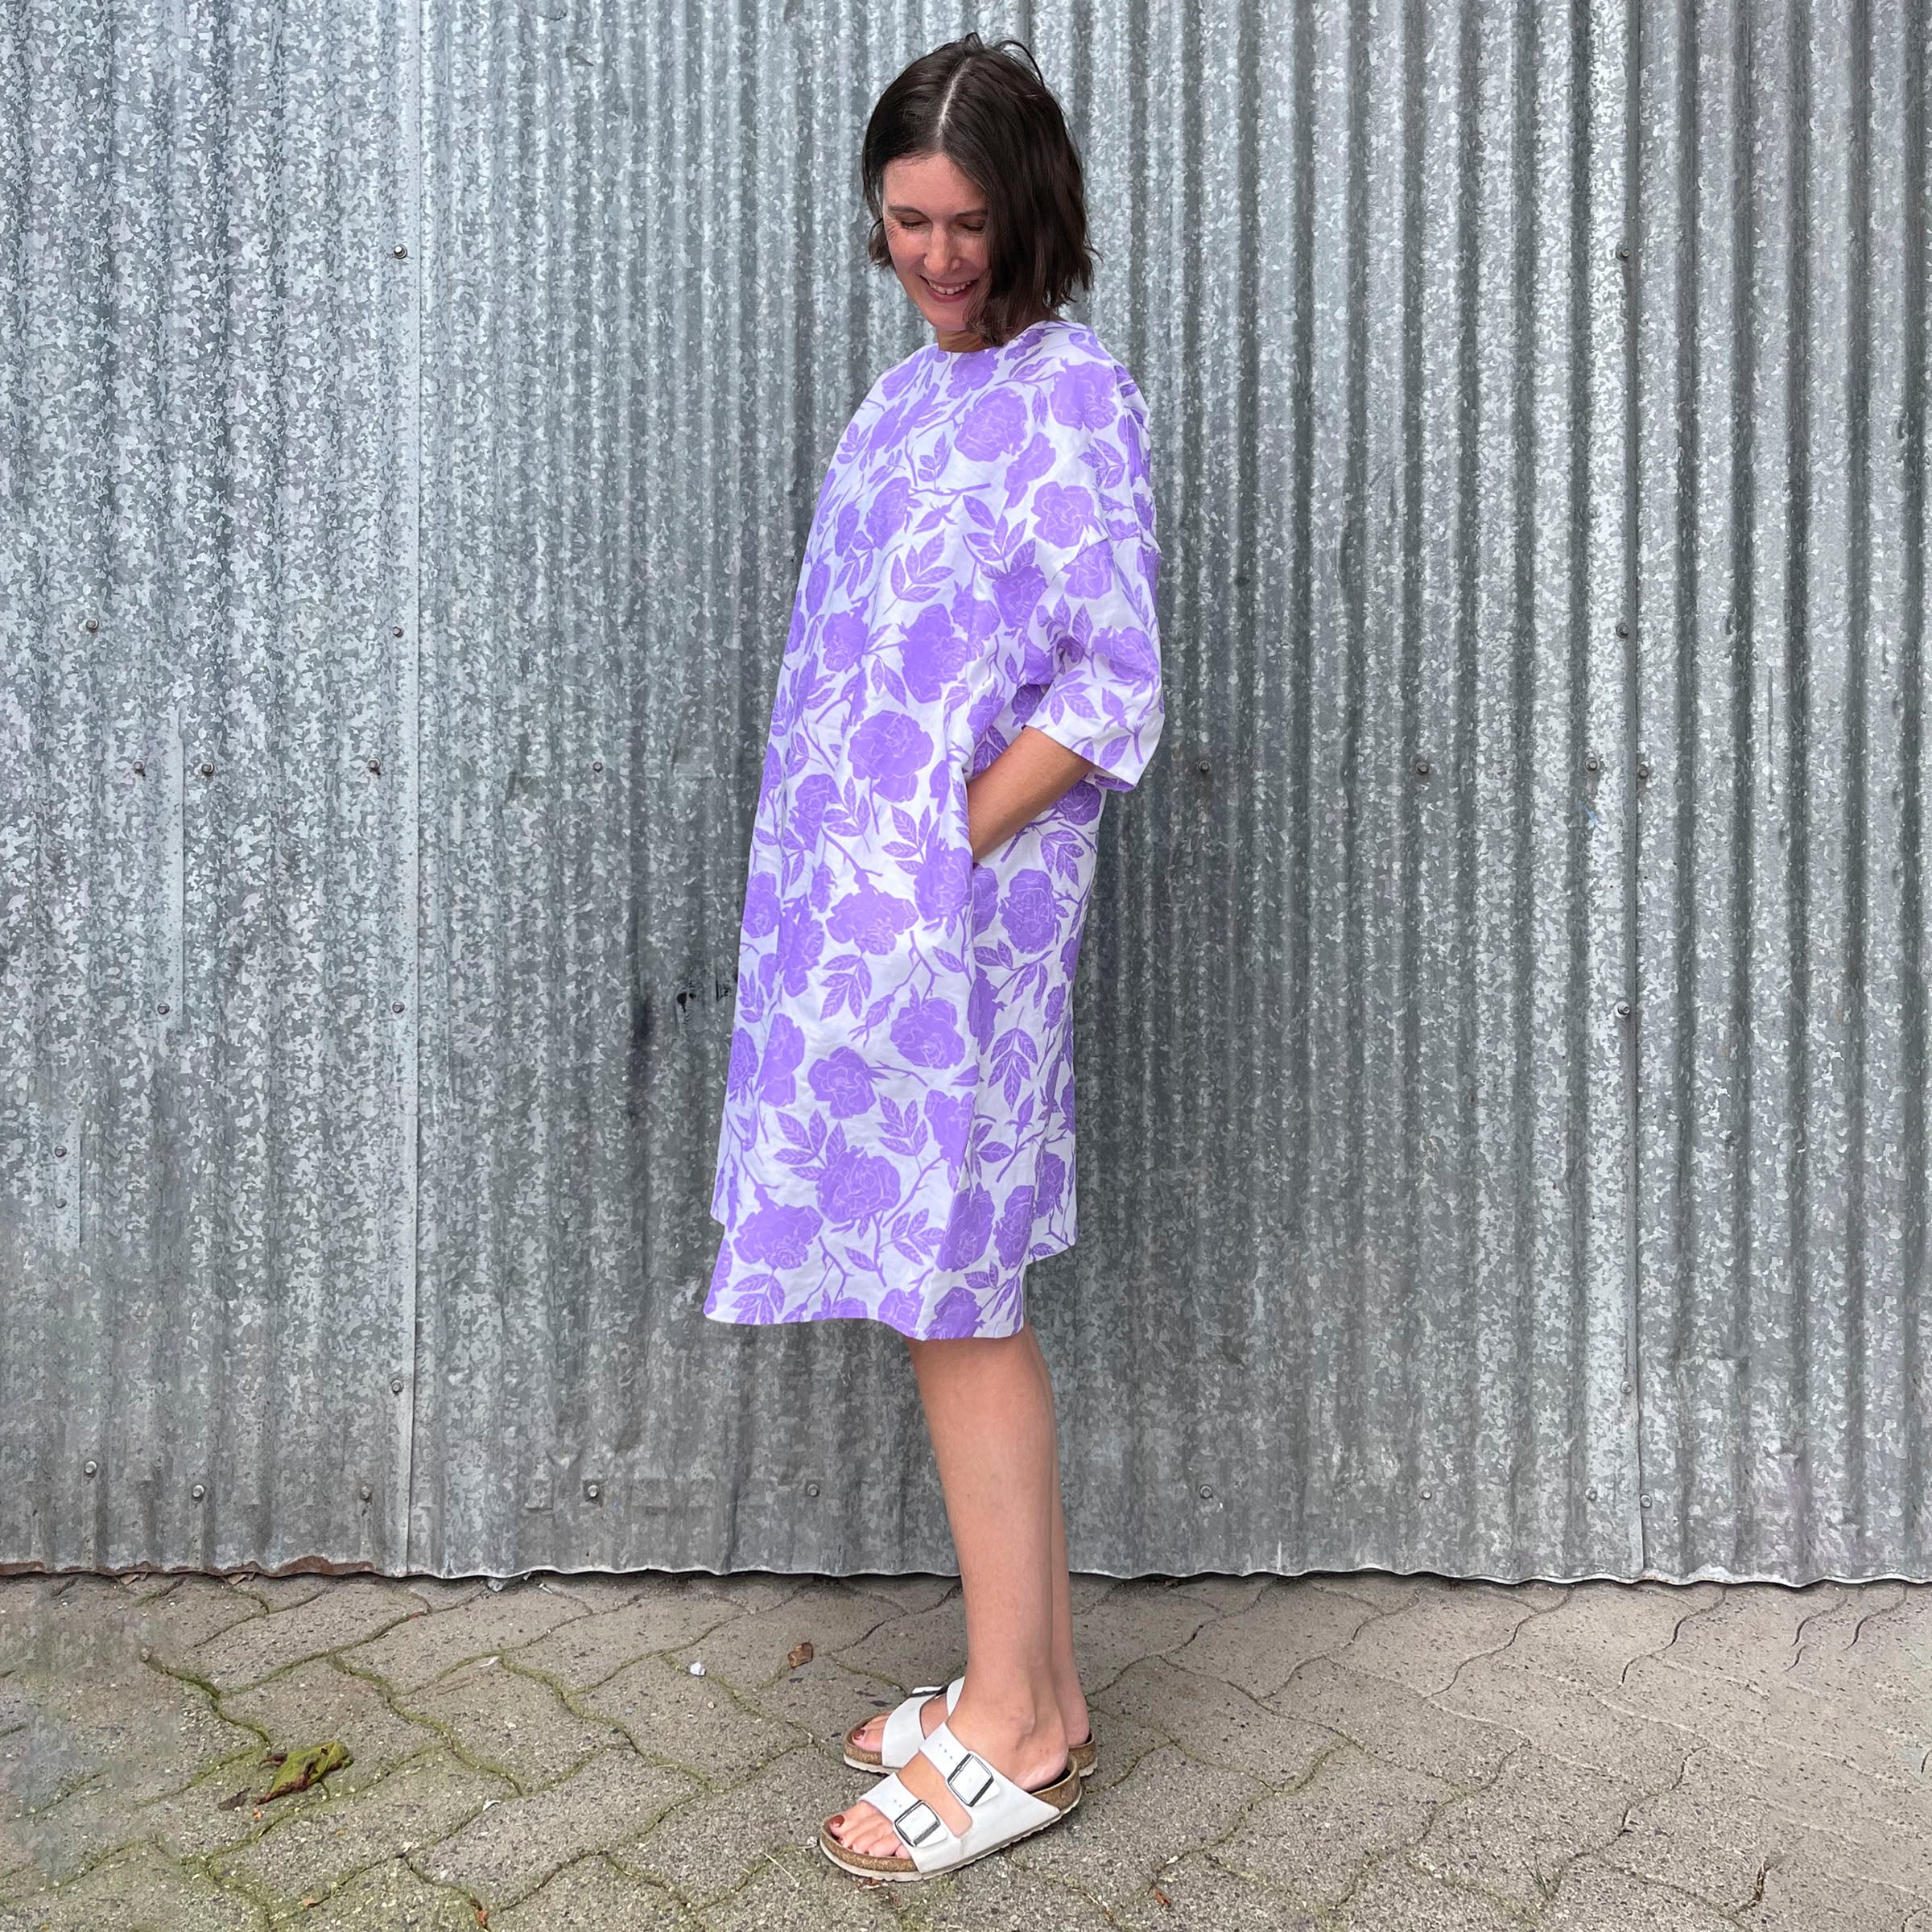 simply linen shift dress with a pattern of lavender rose blooms